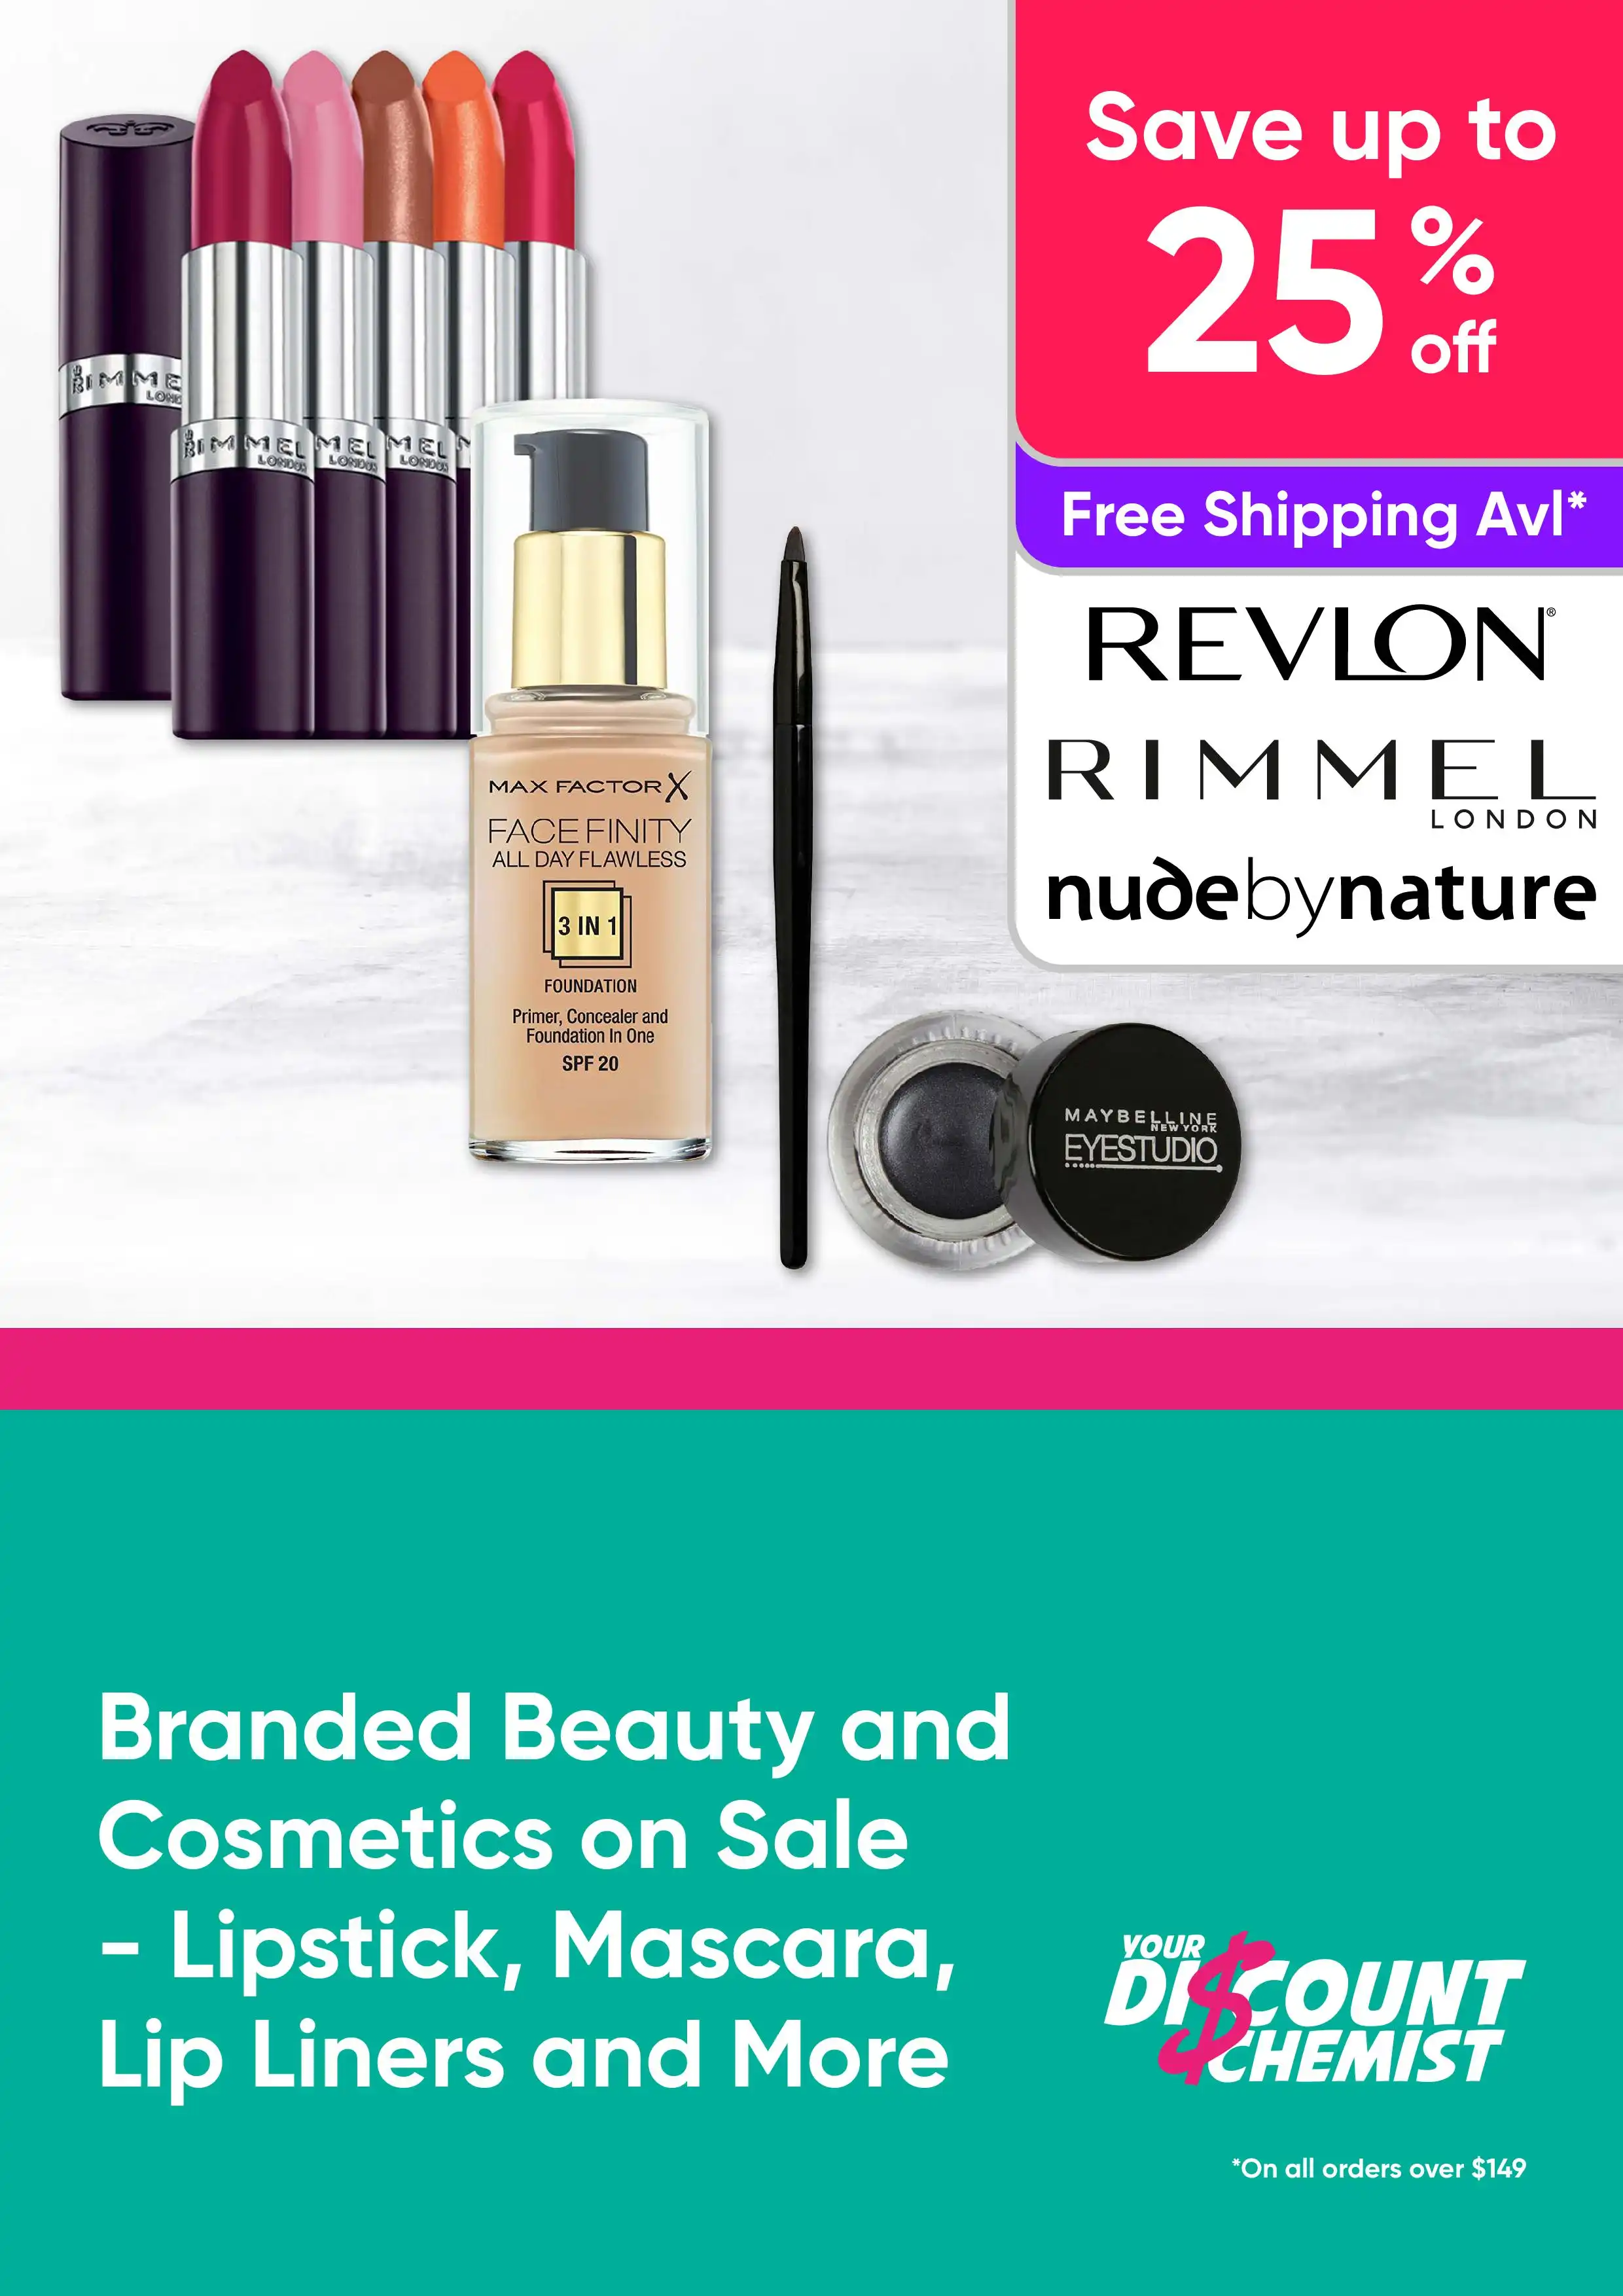 Branded Beauty and Cosmetic on Sale - Lipstick, Mascara, Lip Liners and More Up to 25% Off